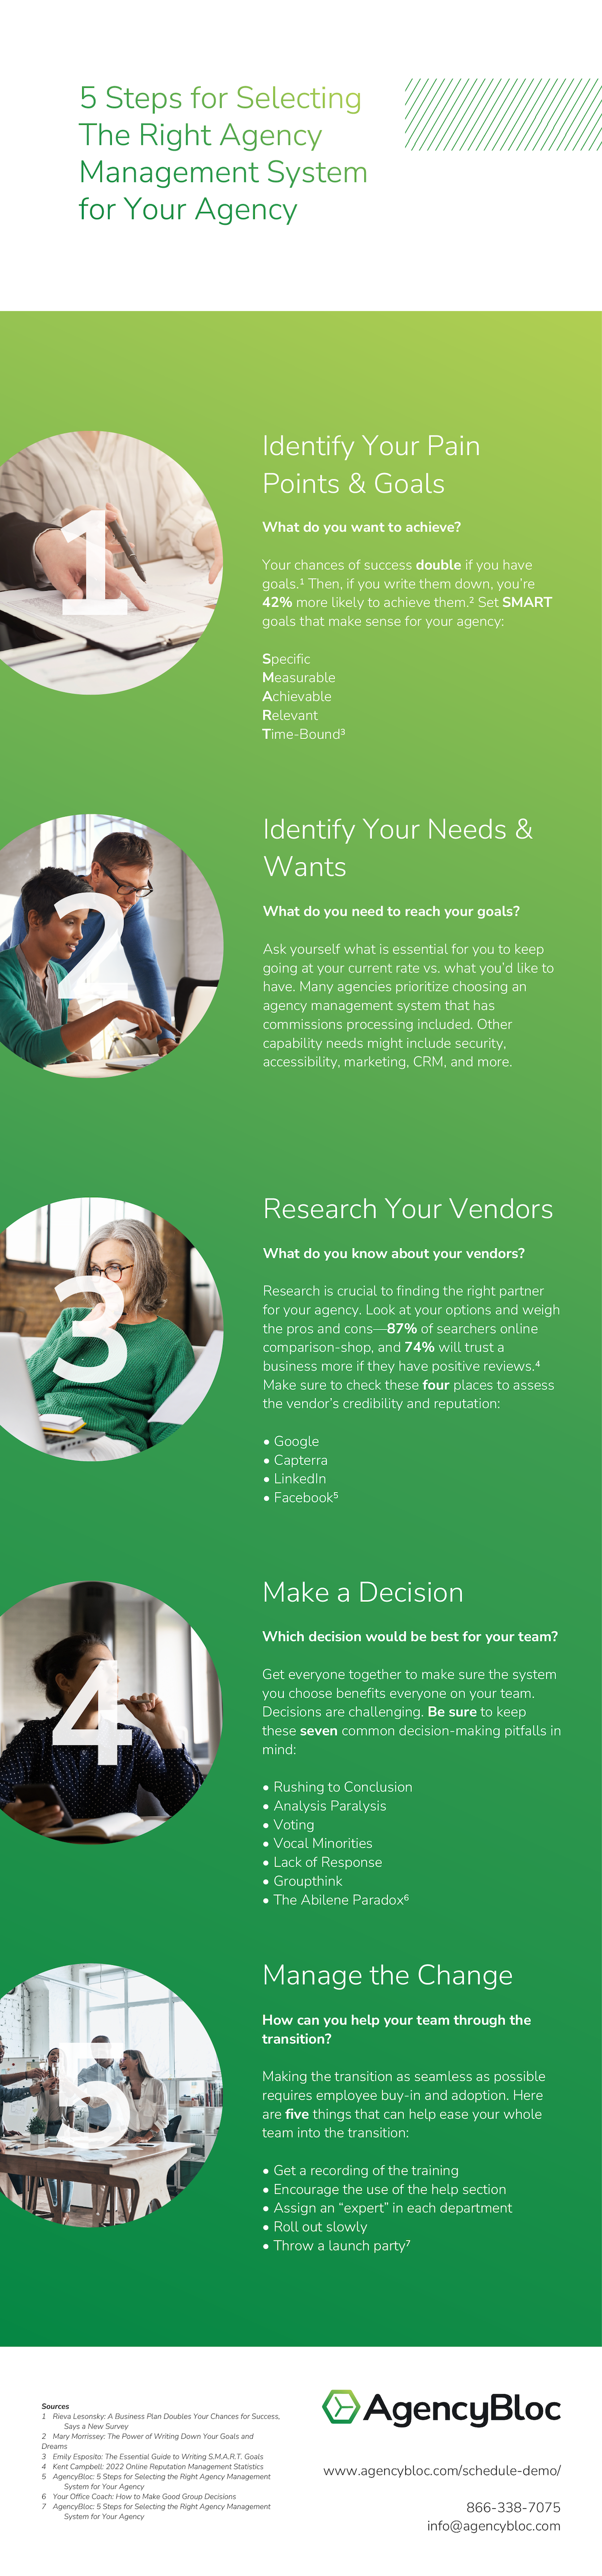 5 Steps for Selecting The Right AMS for Your Agency Infographic 